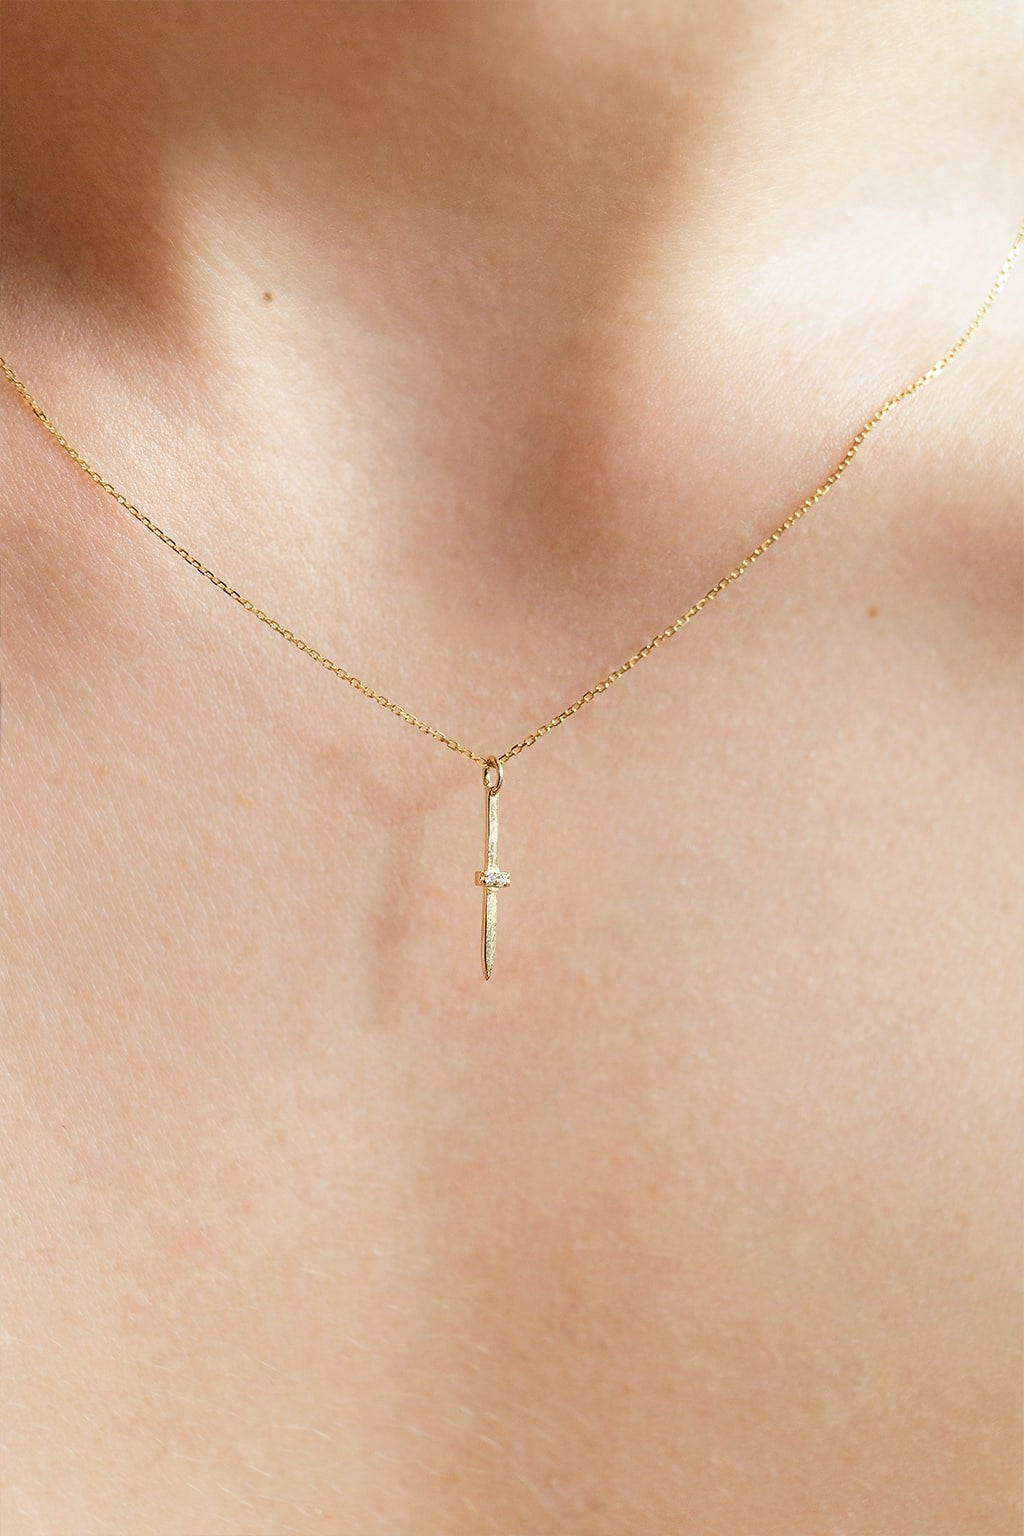 Sword gold necklace